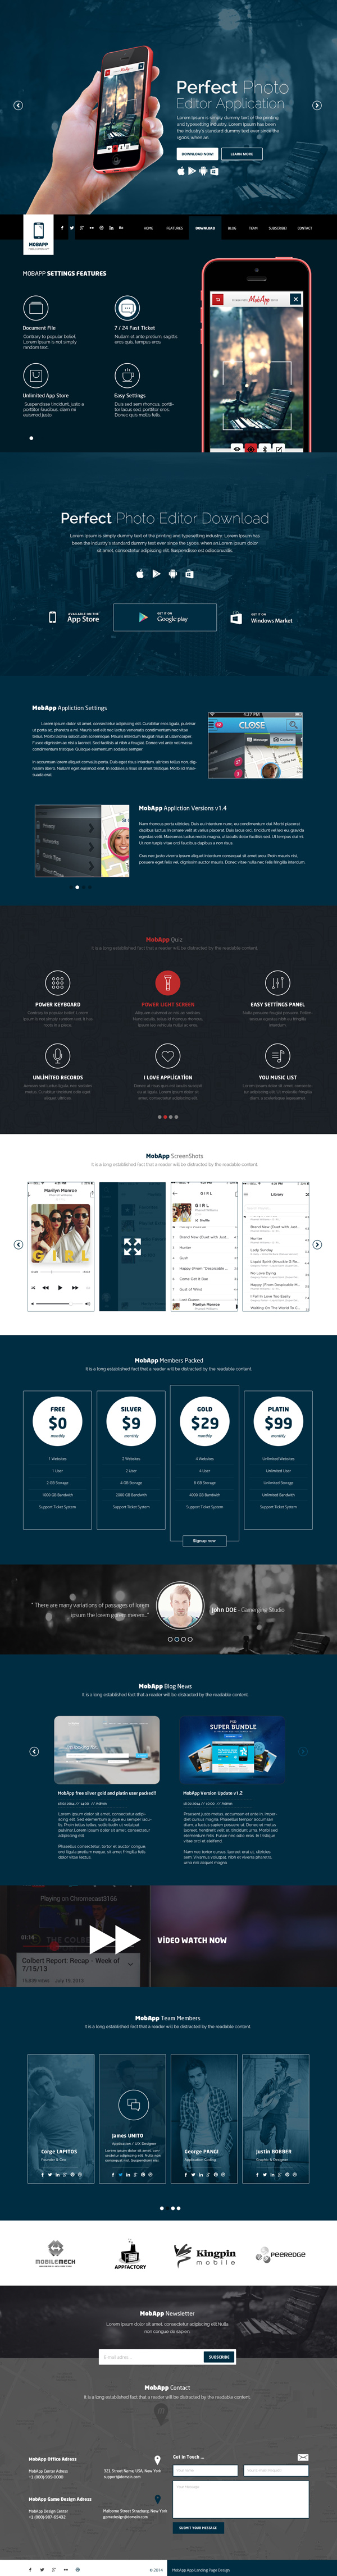 MobApp - One Page App HTML5 Landing Page